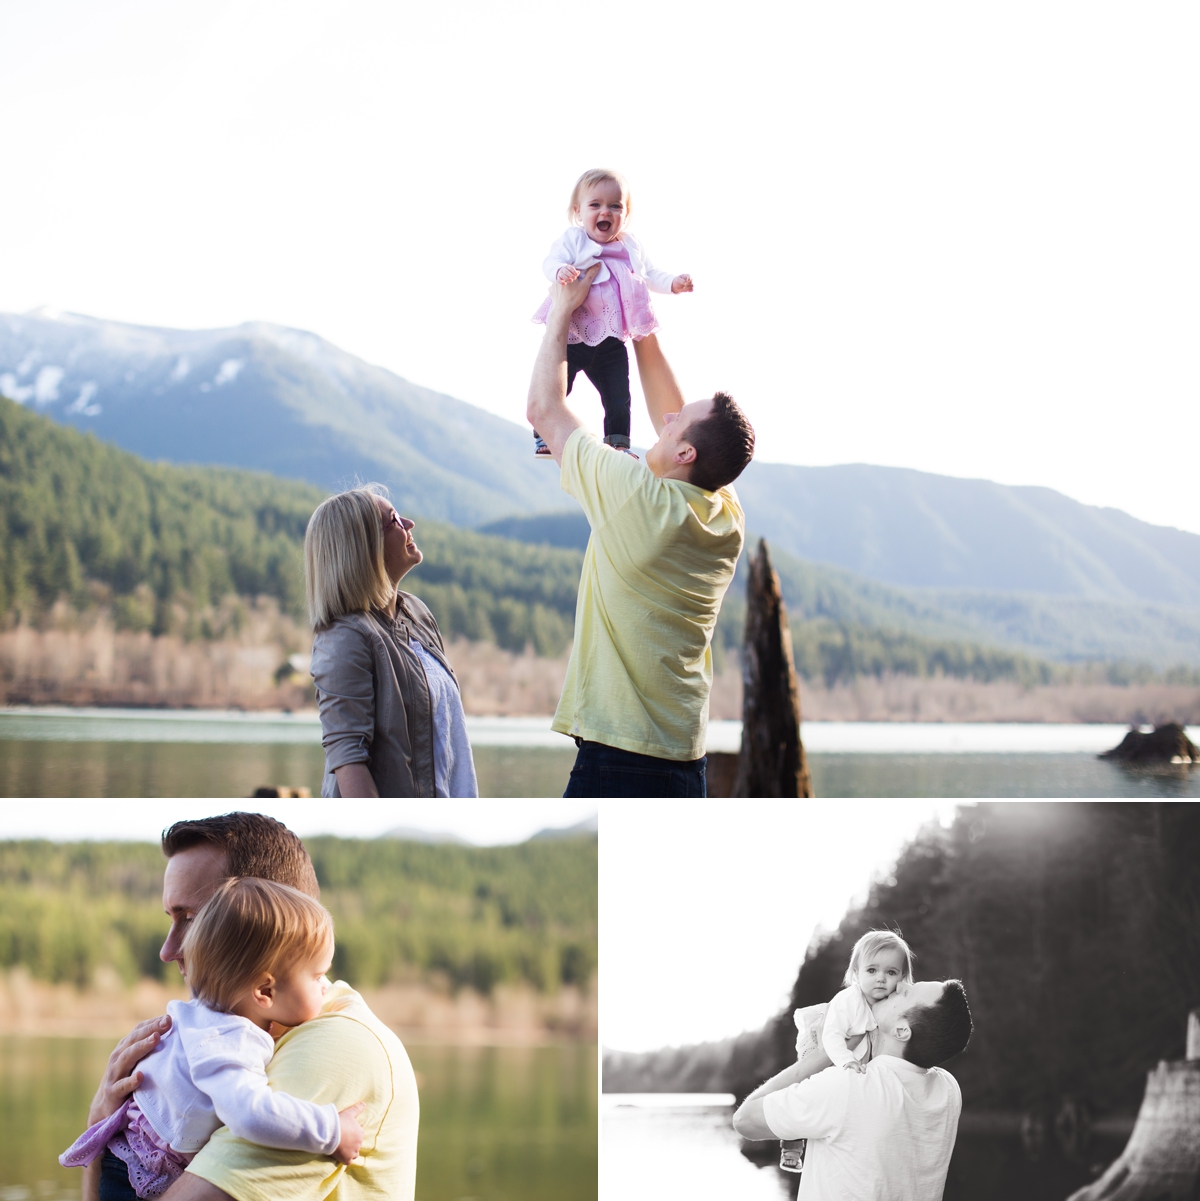 elena s blair seattle baby family photographer outdoors on location